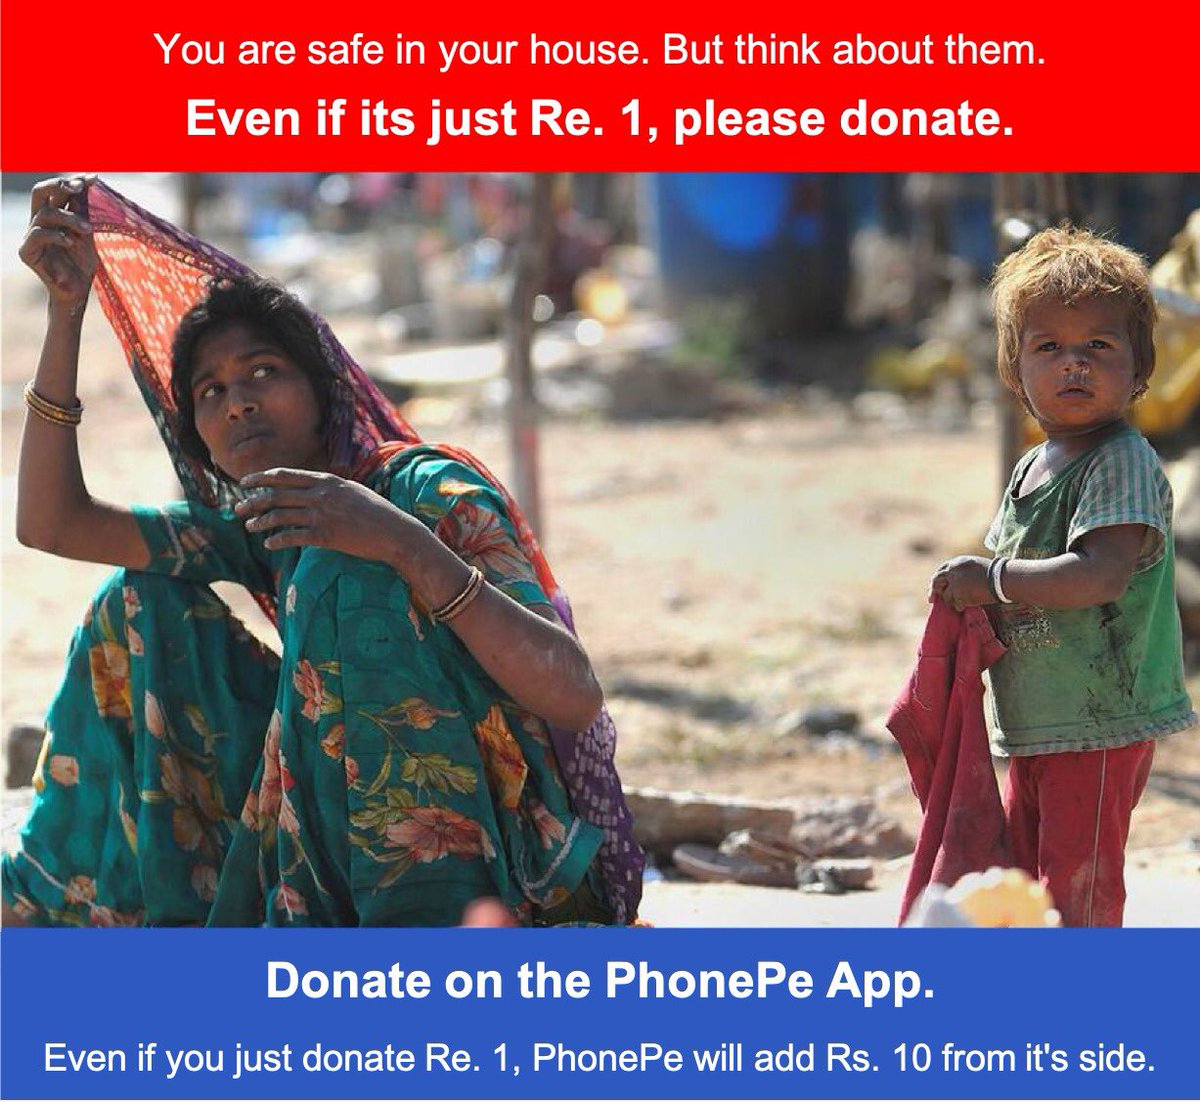 Come on India! Let's fight the Coronavirus together. Join the #i4India Movement and Donate to the #PMCARESFund on PhonePe.When we stand together for India, no fight is too big, no act too small. #i4India #EachRupeeCounts
Donate here: phon.pe/i4India